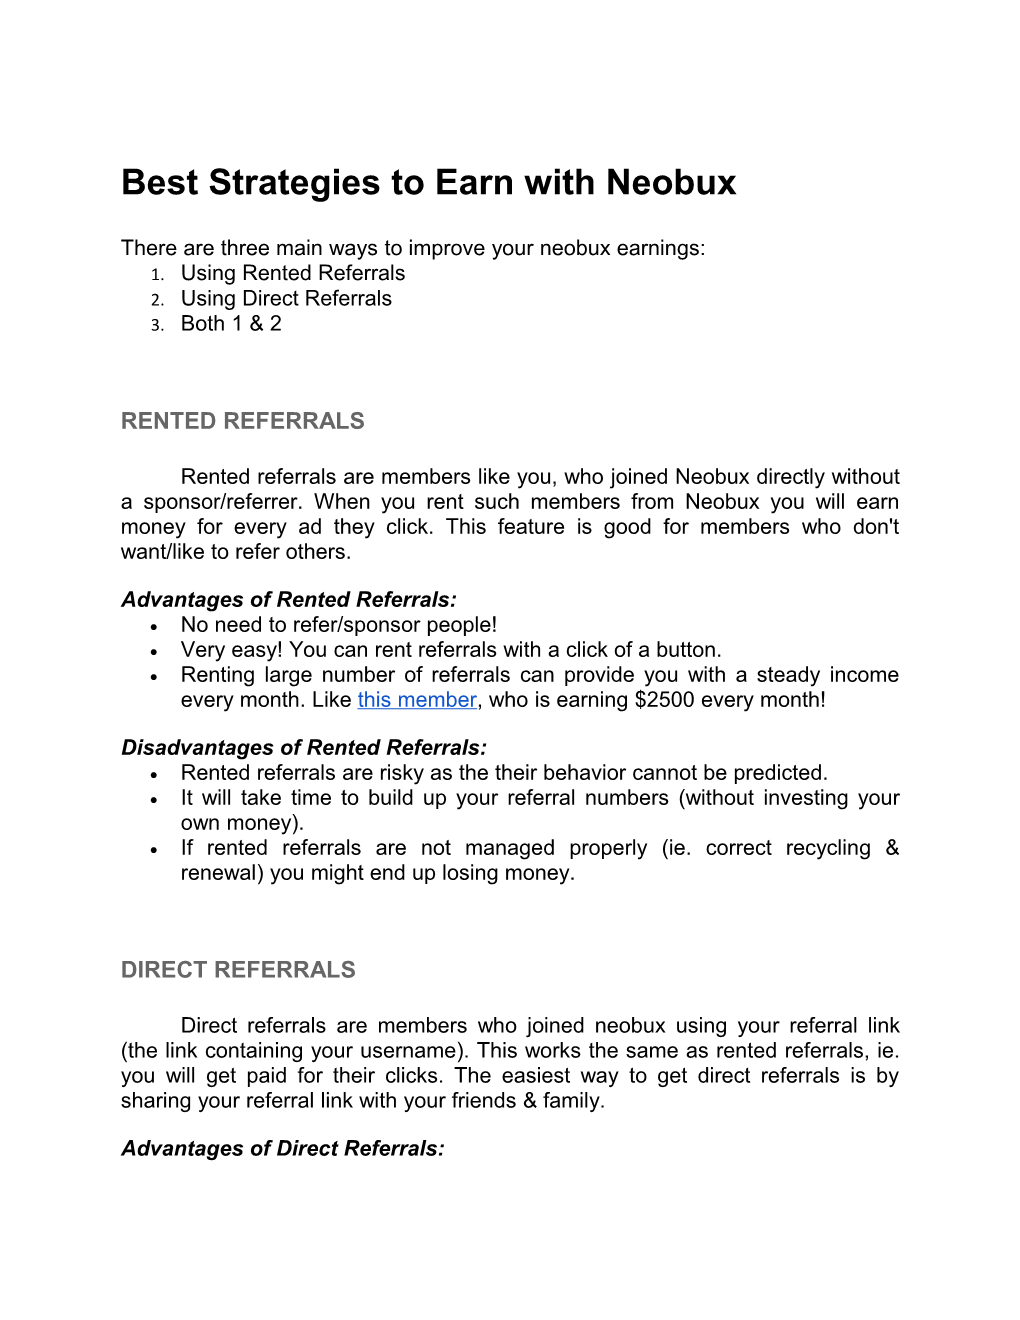 Best Strategies to Earn with Neobux